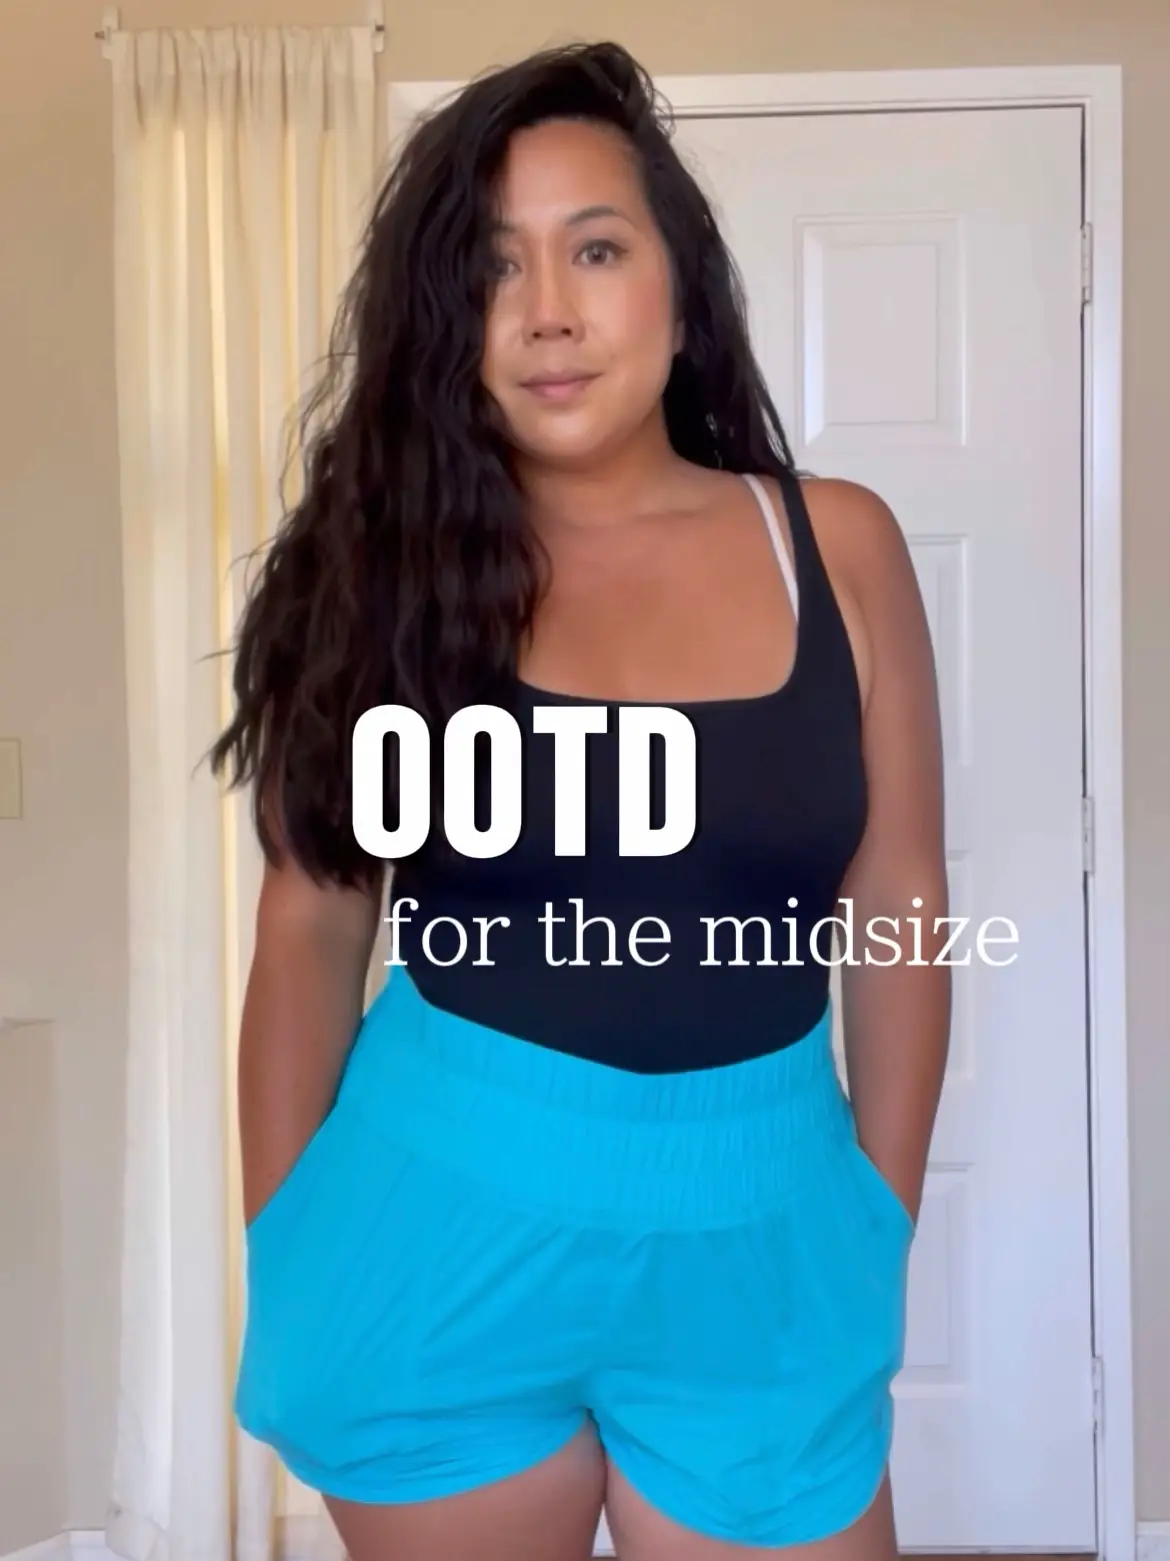 Ootd for the midsize, Gallery posted by tammynize